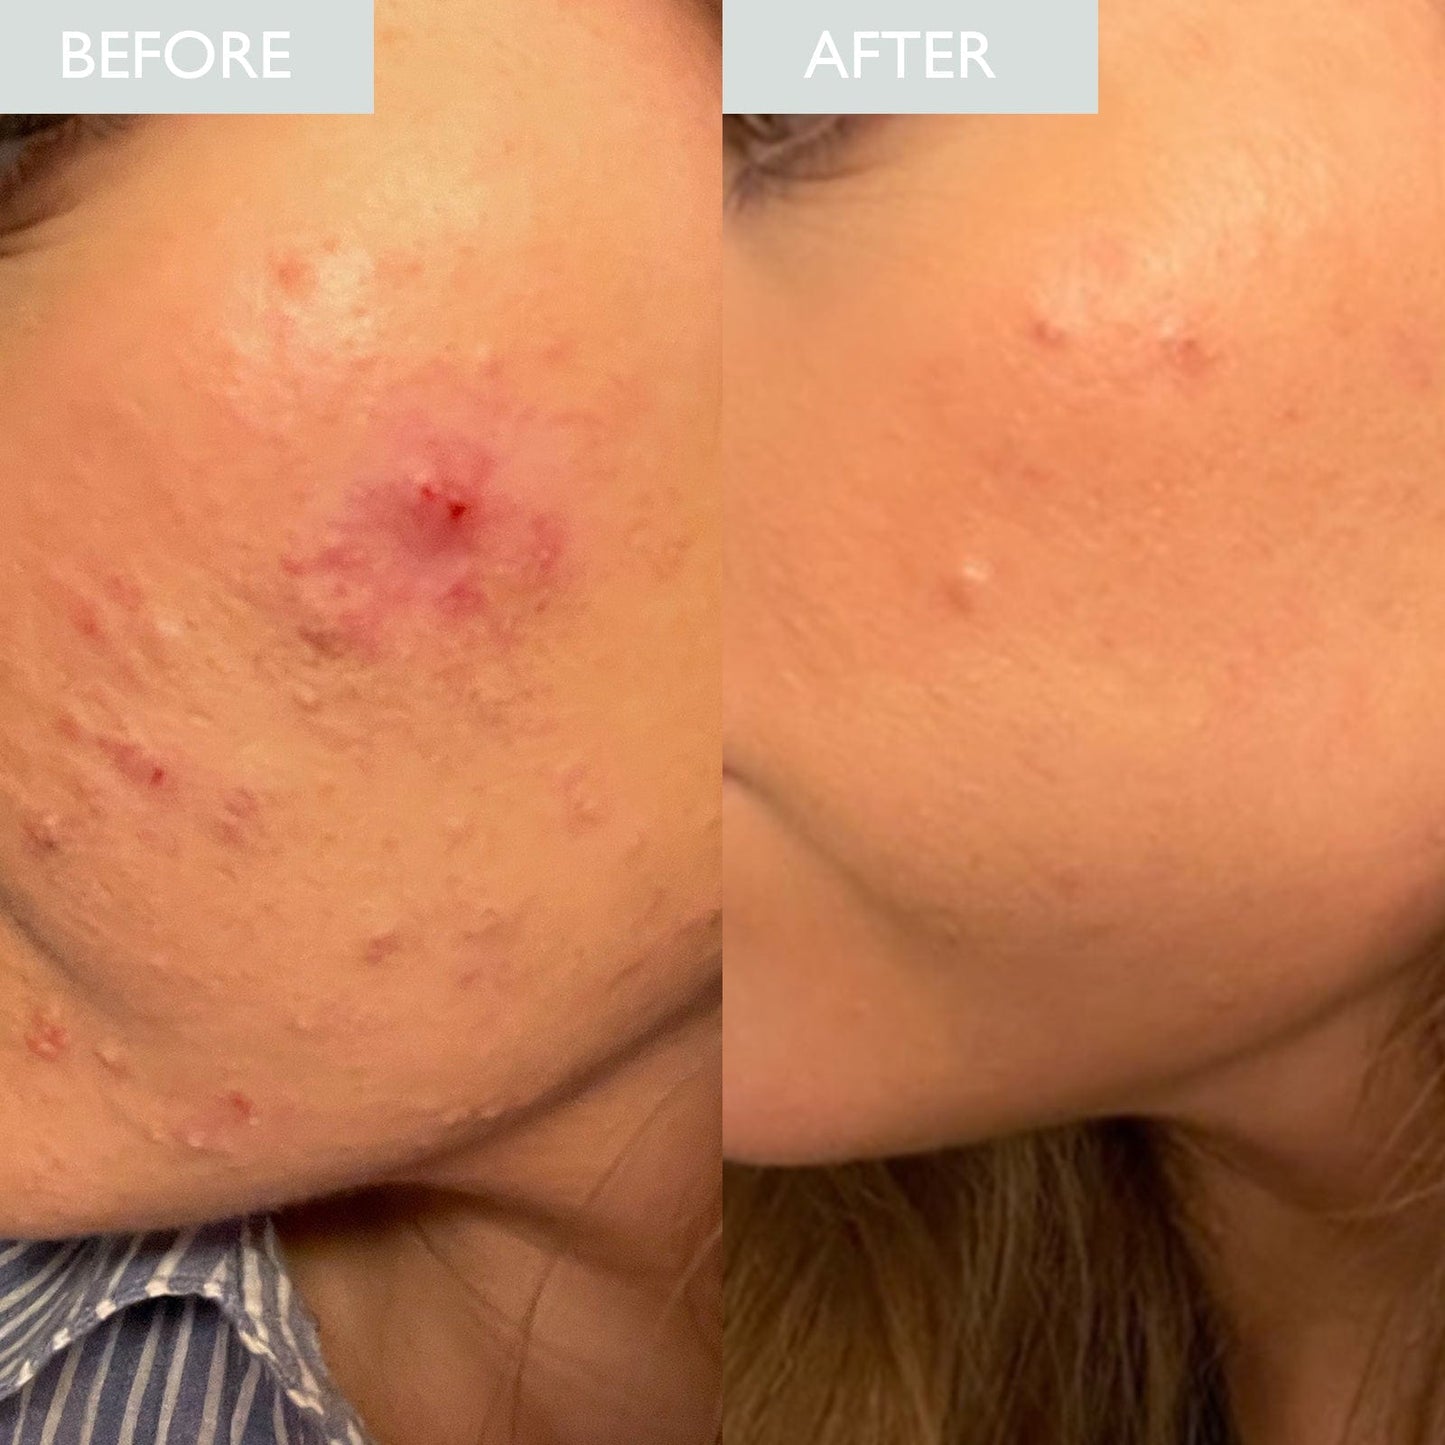 SKINICIAN Calming Serum Before and After picture on a lady with acne on her cheeks.  Clear and improved skin redness is shown